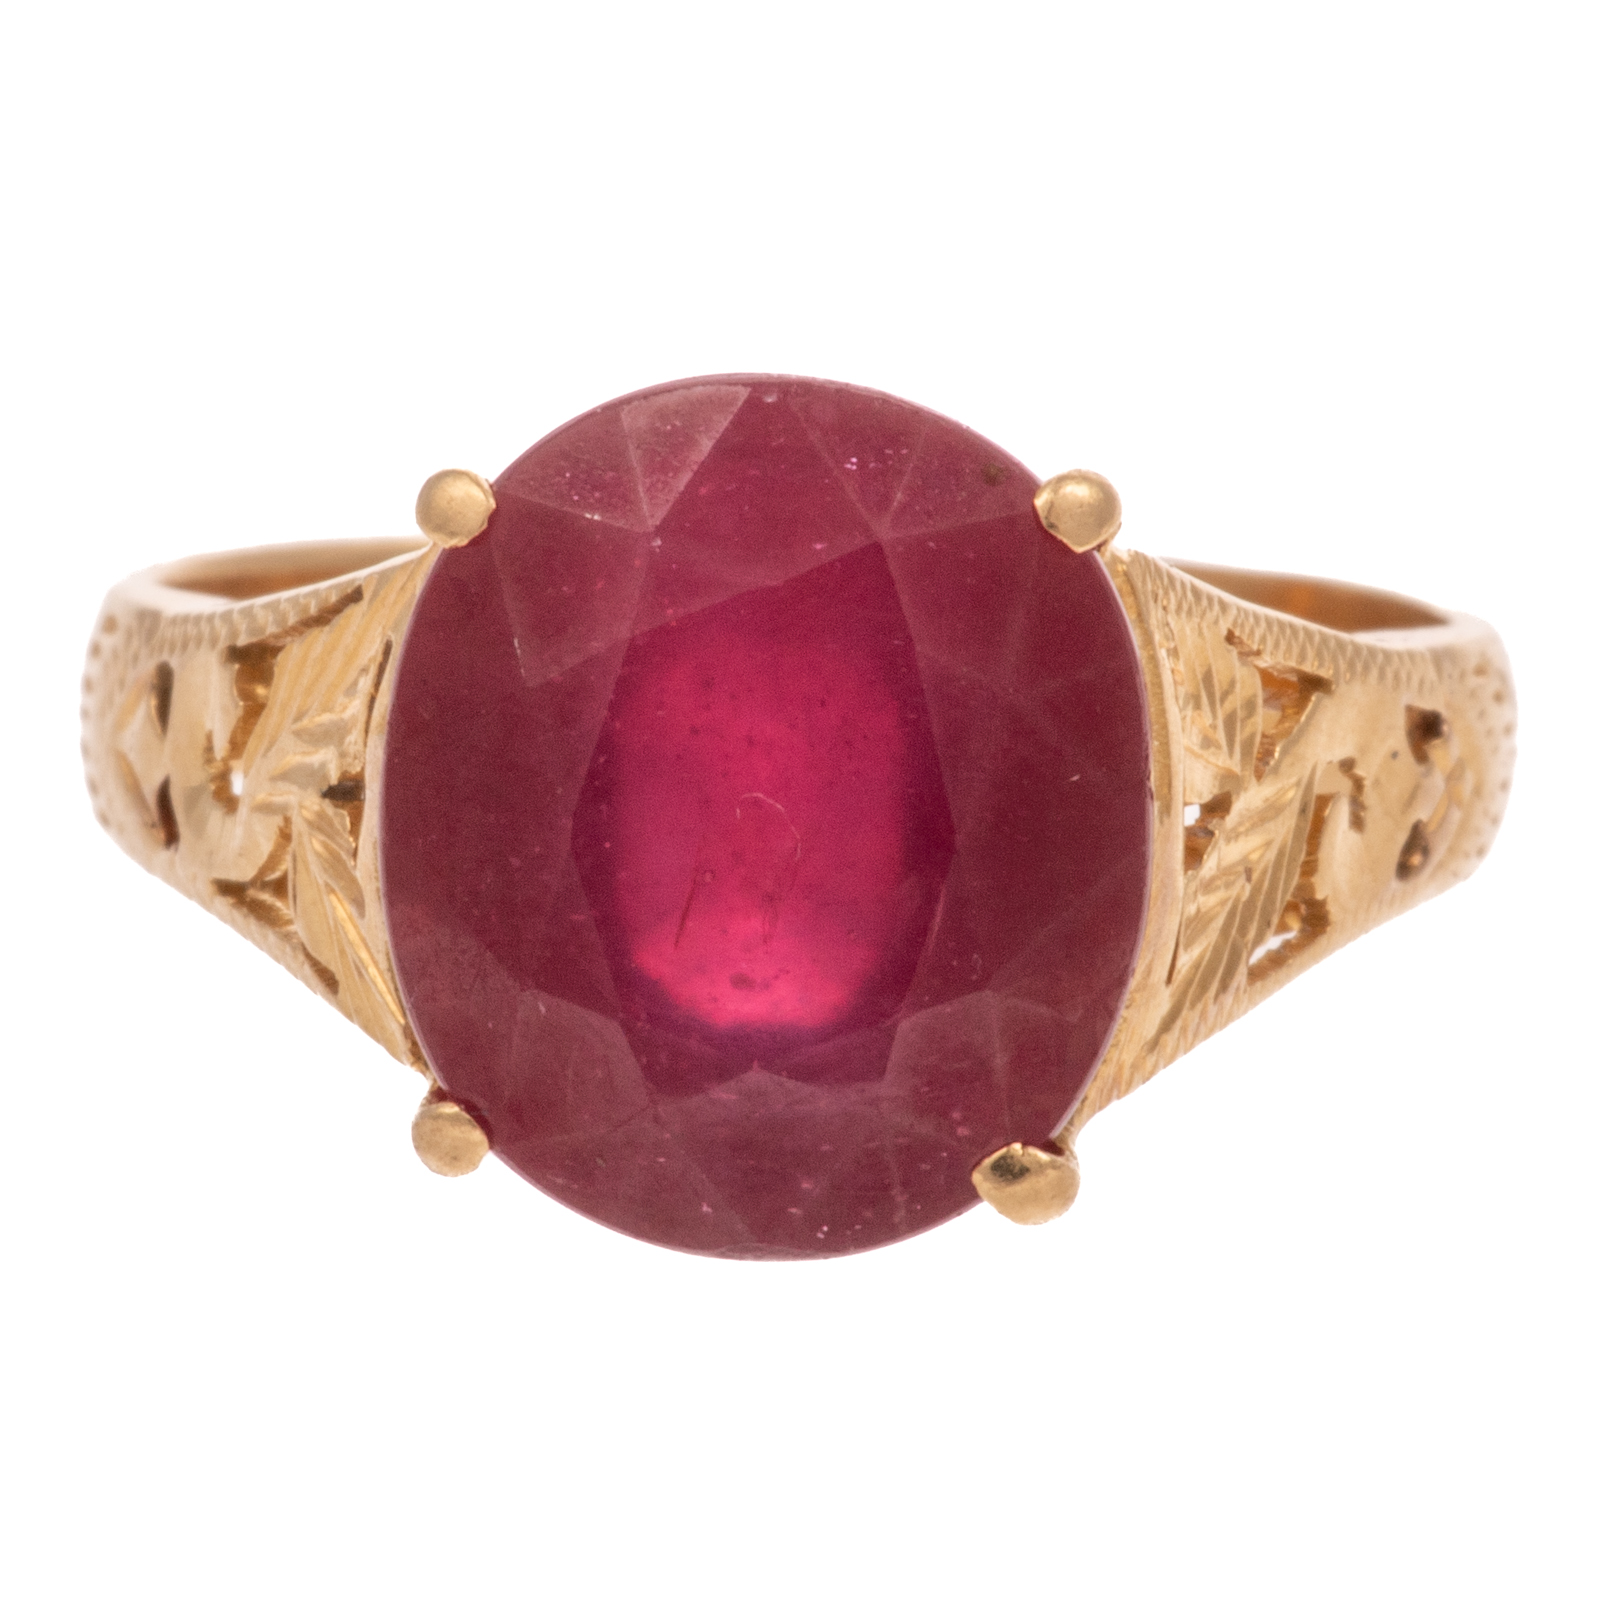 A CLASSIC RUBY RING IN 18K YELLOW